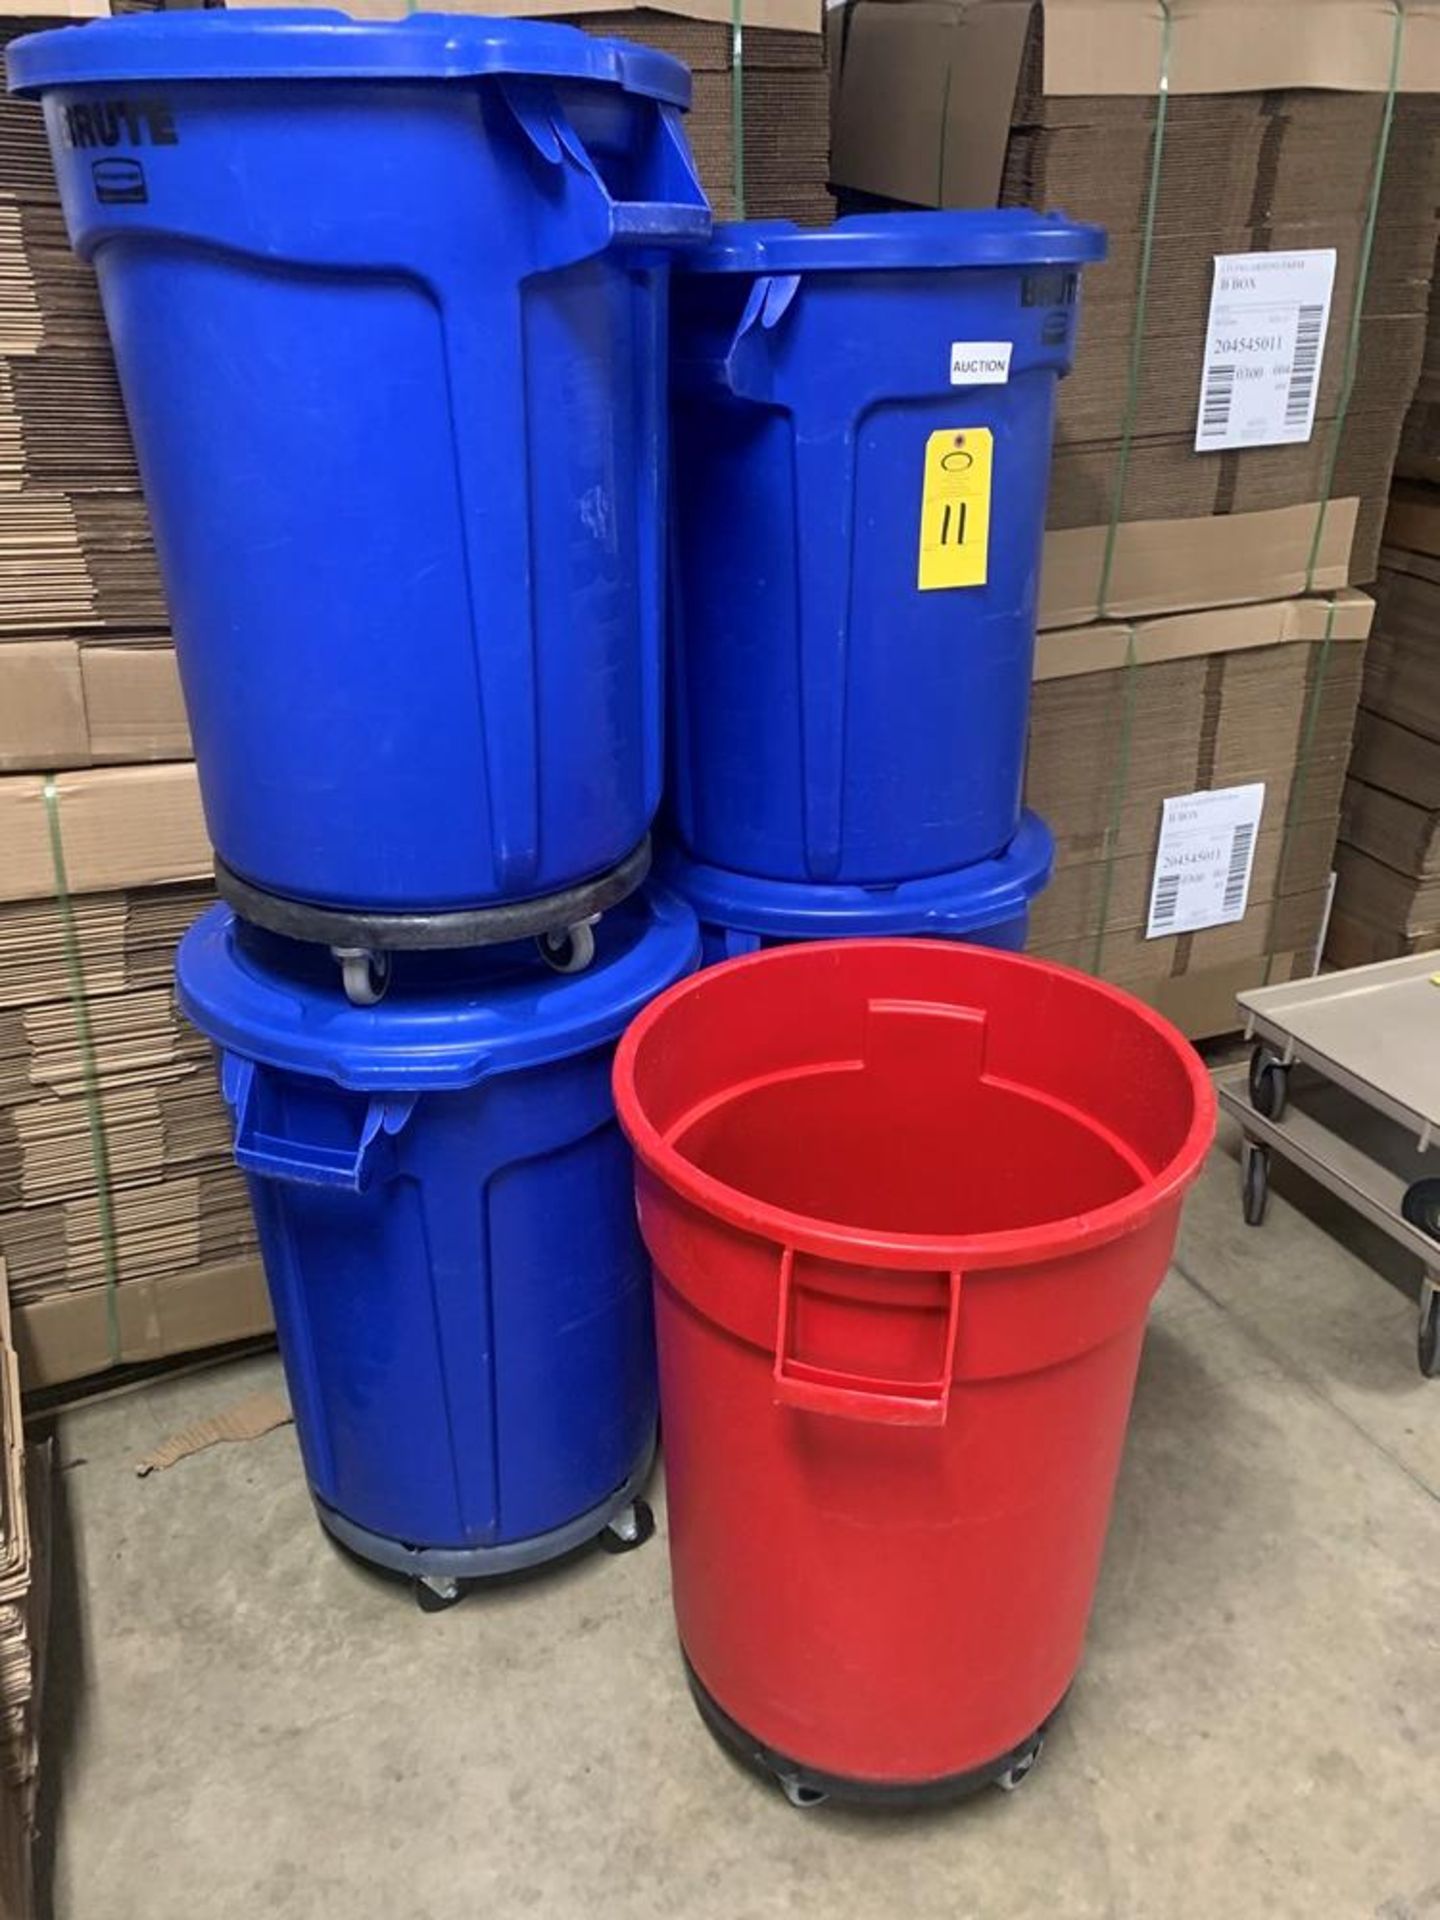 Lot Brute Barrels, (4) Blue Barrels with lids, (1) Red (Required Loading Fee: $15.00) NO HAND - Image 2 of 2